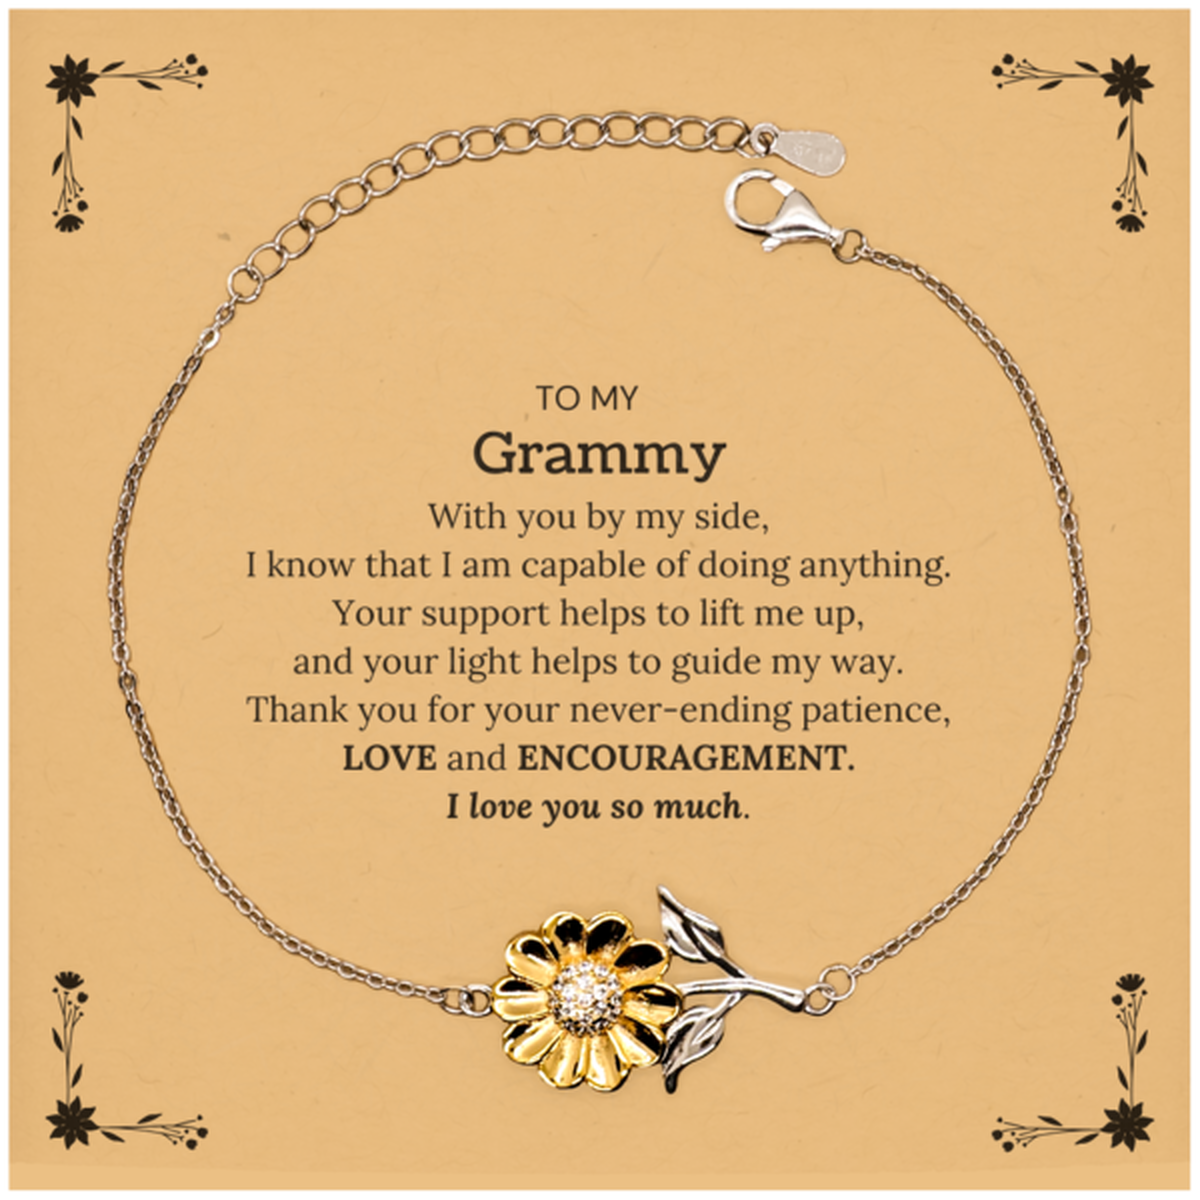 Appreciation Grammy Sunflower Bracelet Gifts, To My Grammy Birthday Christmas Wedding Keepsake Gifts for Grammy With you by my side, I know that I am capable of doing anything. I love you so much